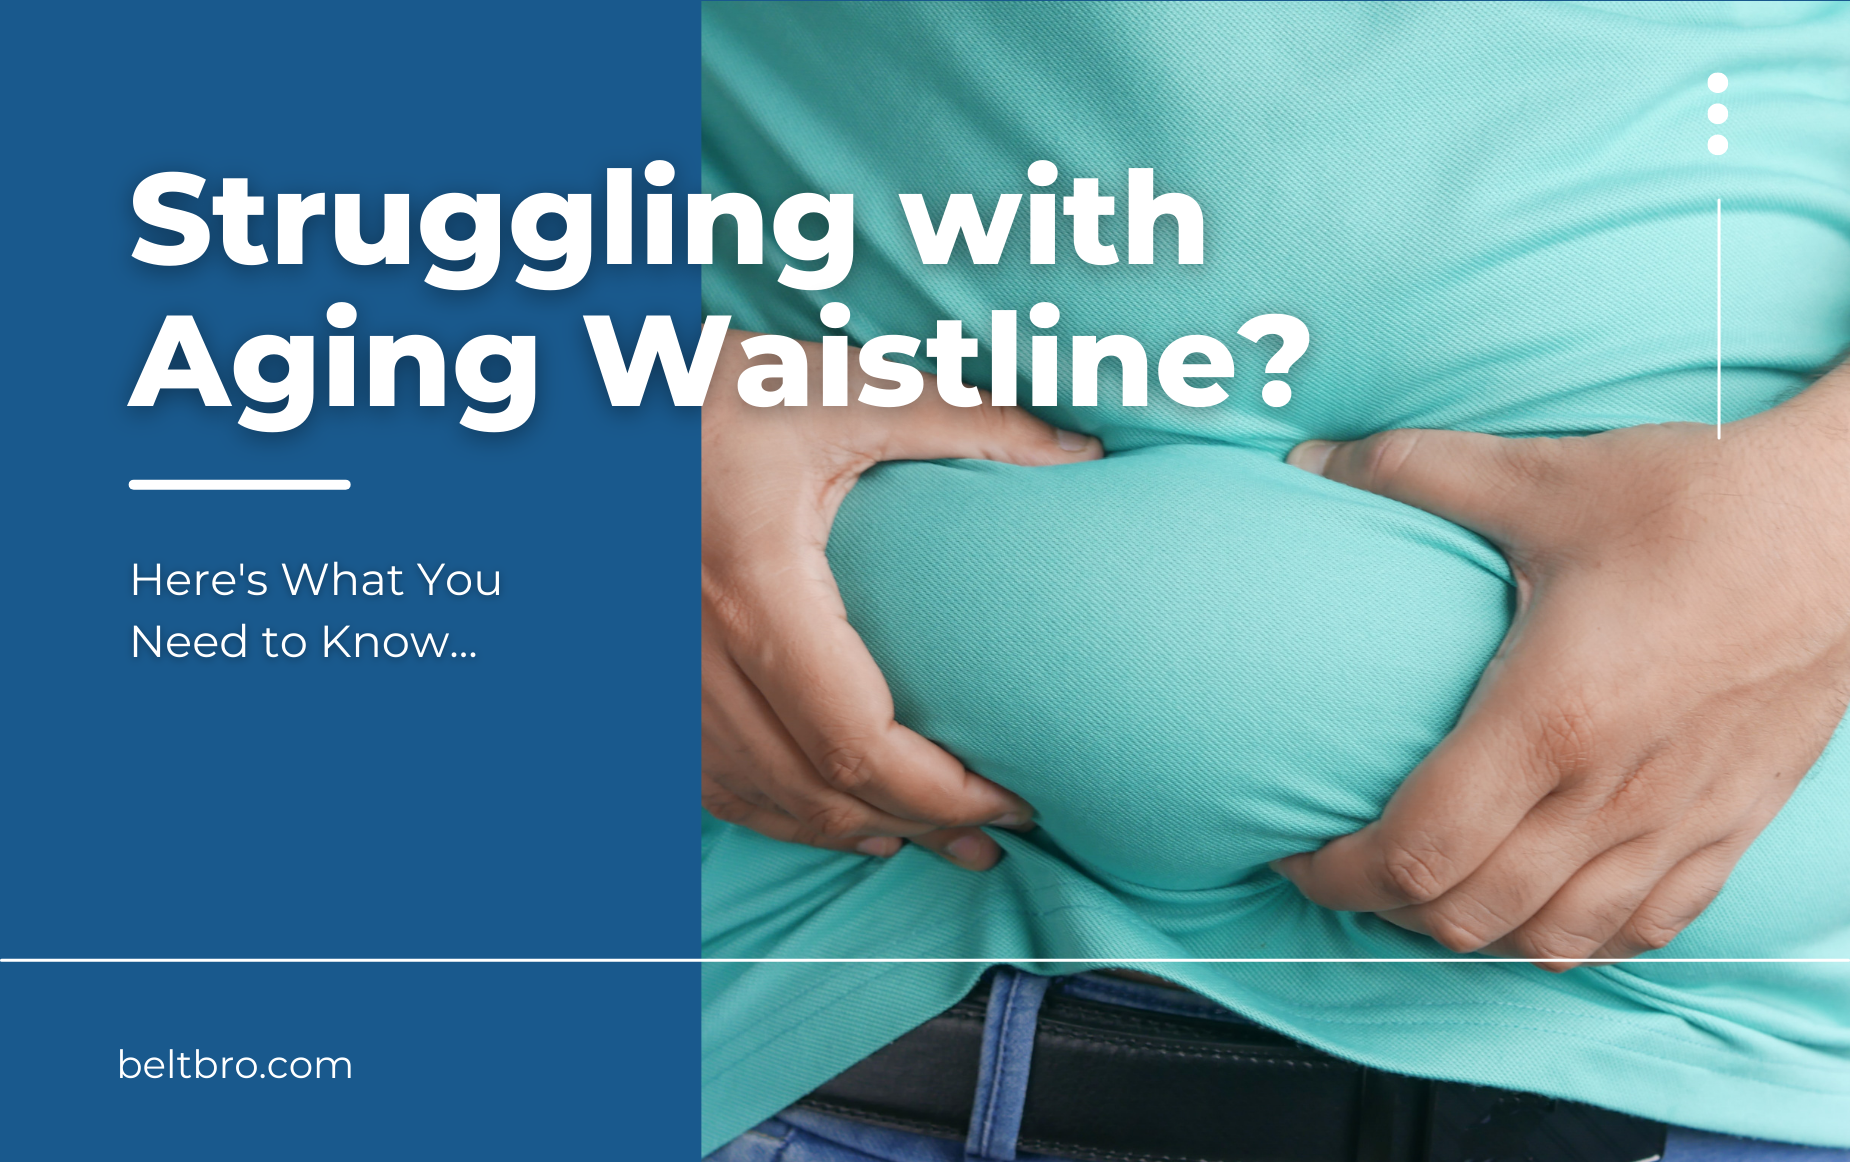 Struggling with an Aging Waistline? Here’s What You Need to Know